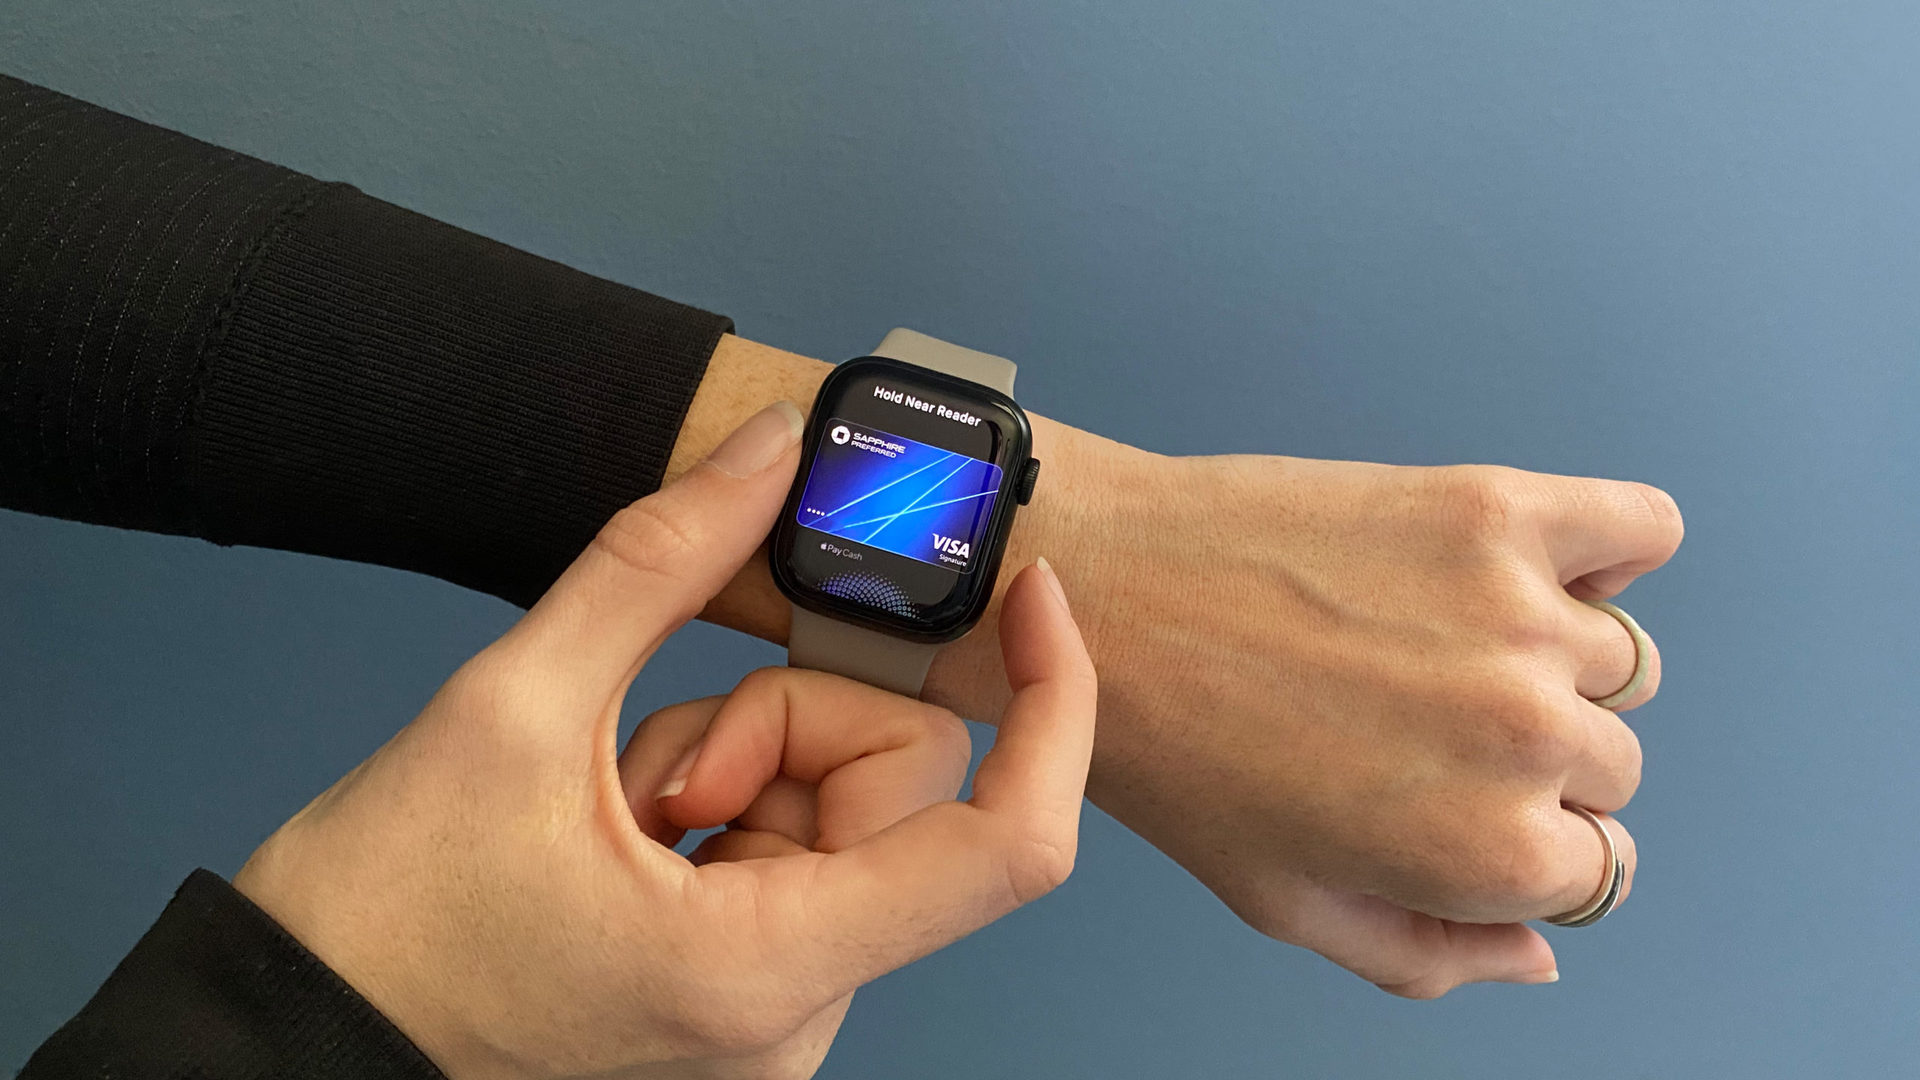 An Apple Watch user activates Apple Pay on her device by double-tapping the side button.